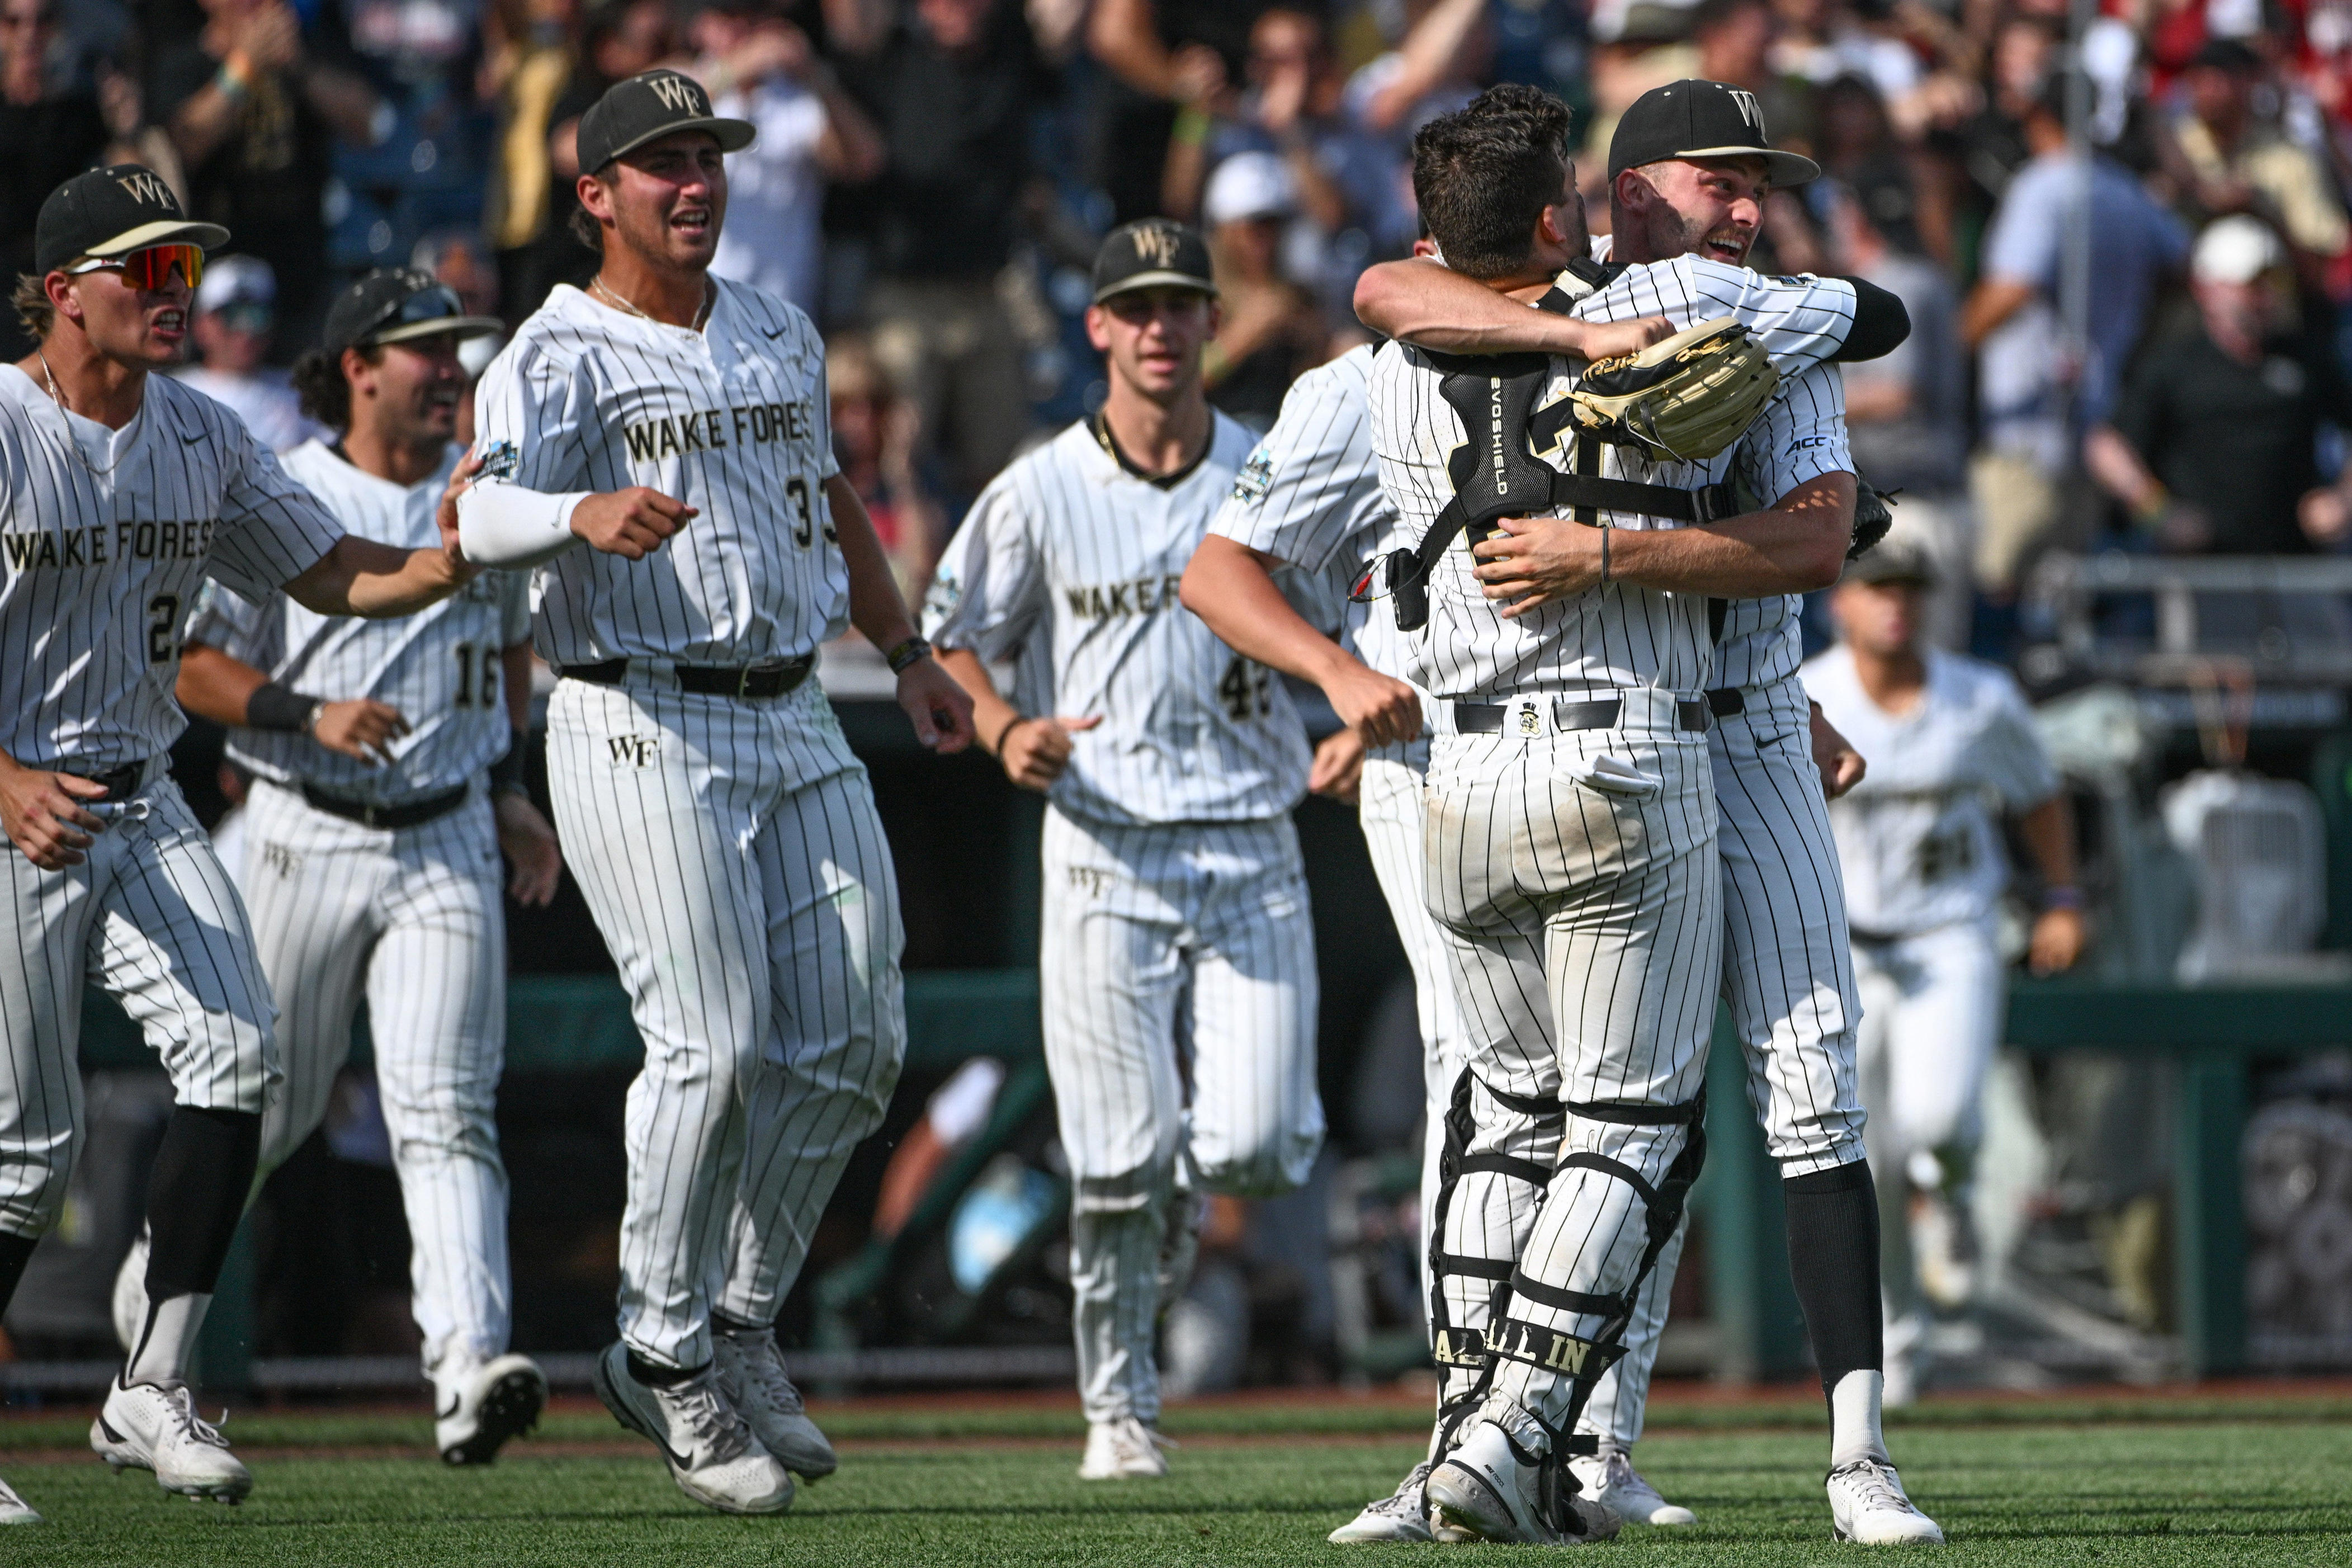 wake forest selected no. 1 in the usa today sports preseason baseball poll followed by lsu